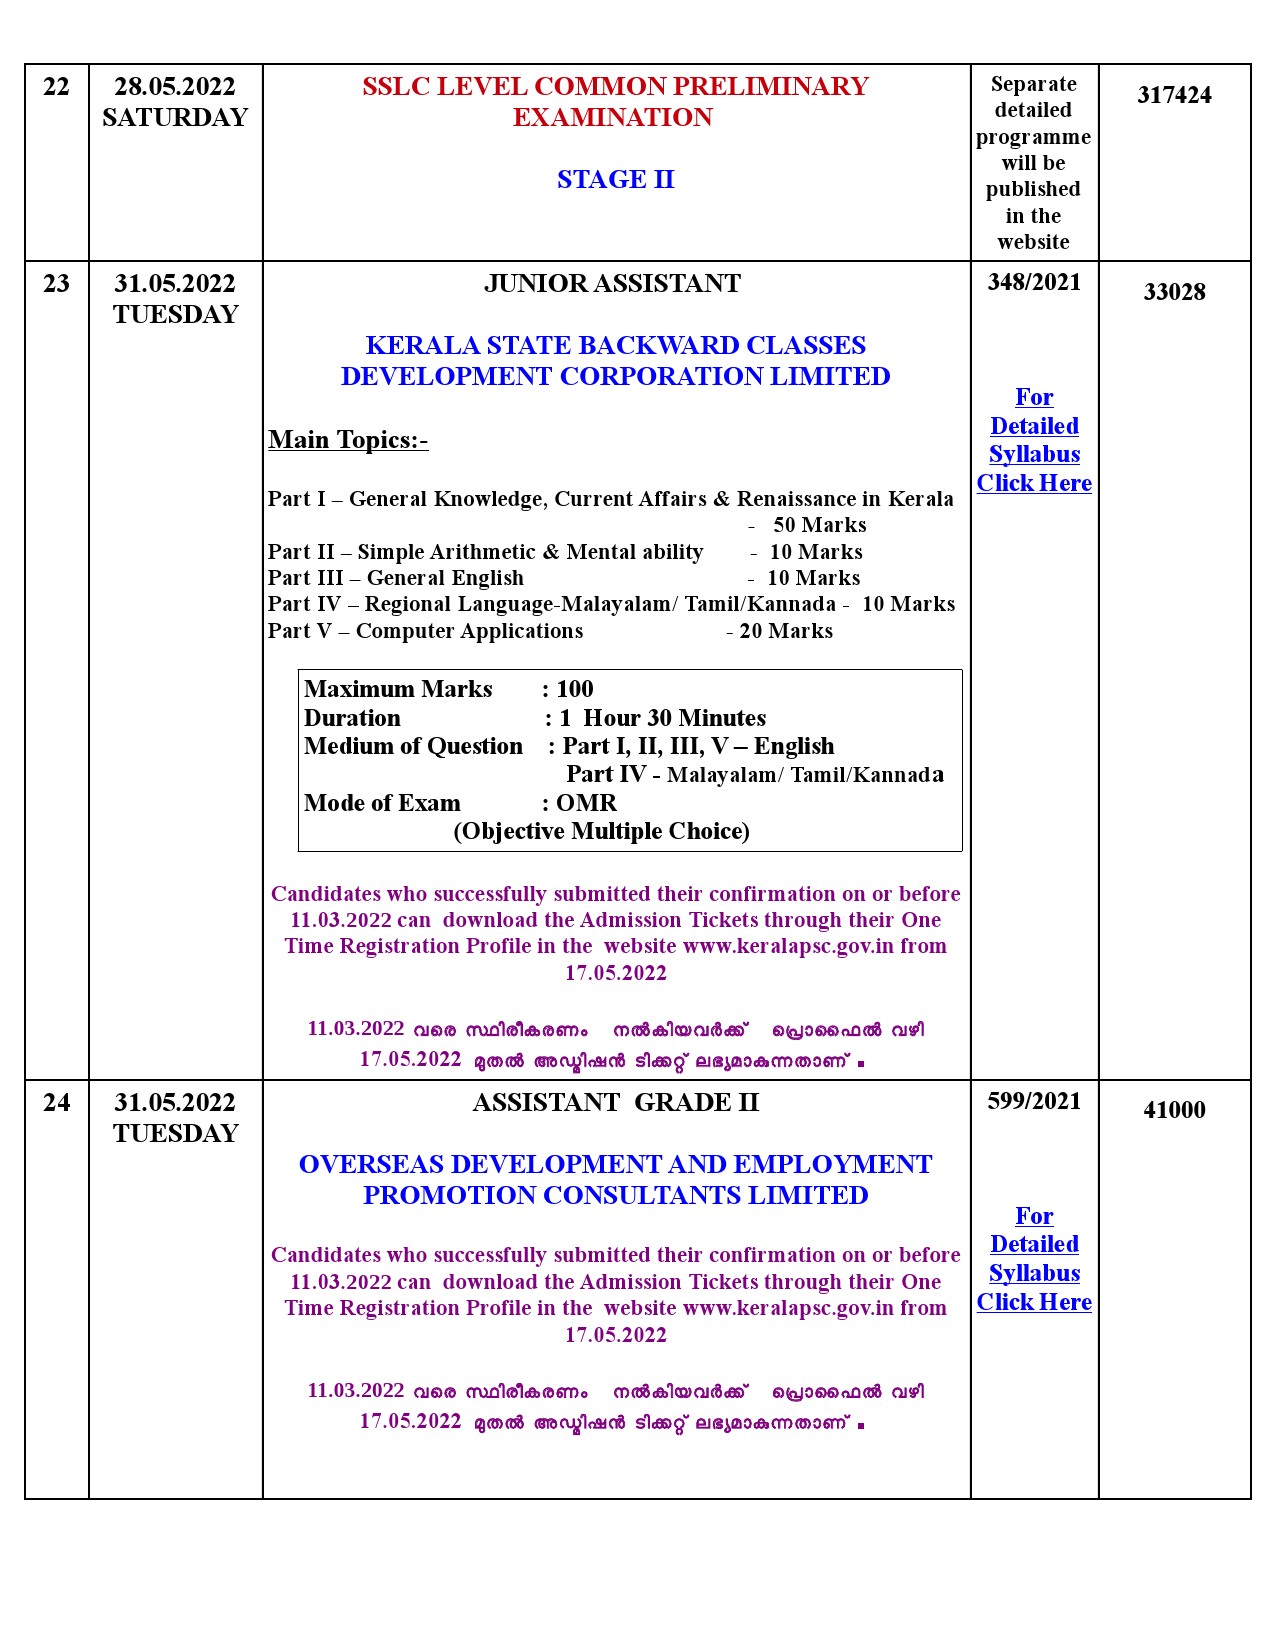 KPSC EXAMINATION PROGRAMME FOR THE MONTH OF MAY 2022 - Notification Image 11